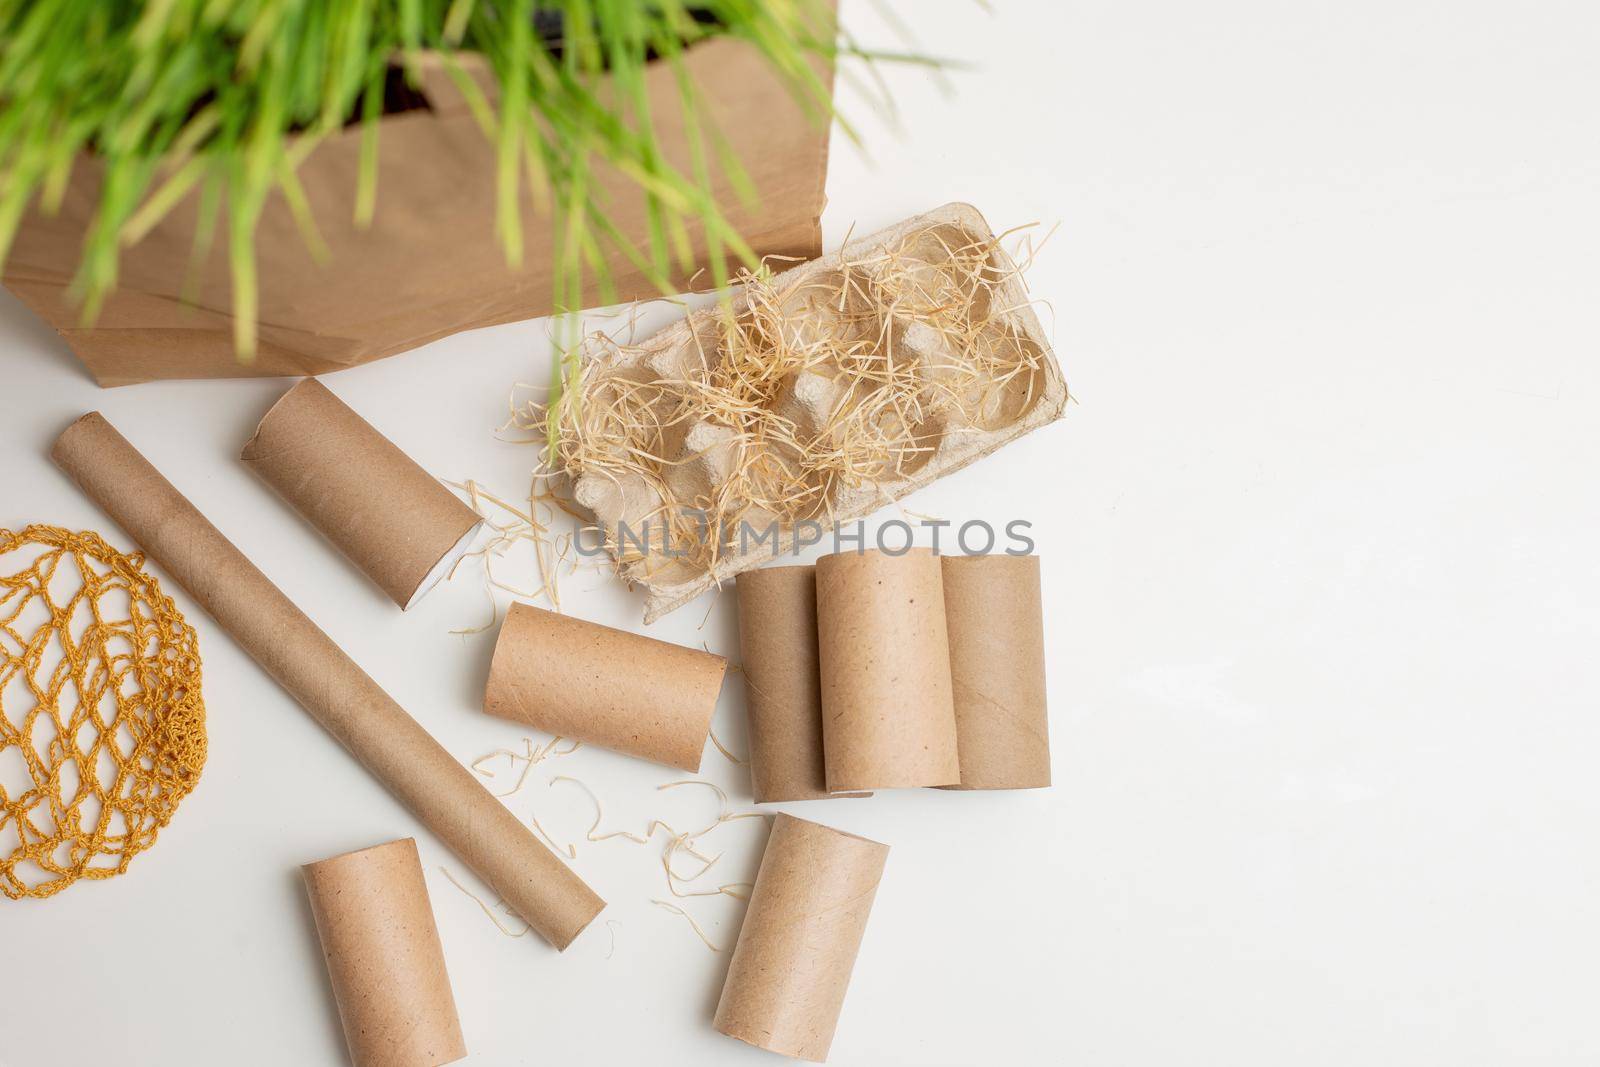 Household waste rollers from cardboard and paper lie on a white table, a knitted bag. The concept of recycling and environmental protection. Top view